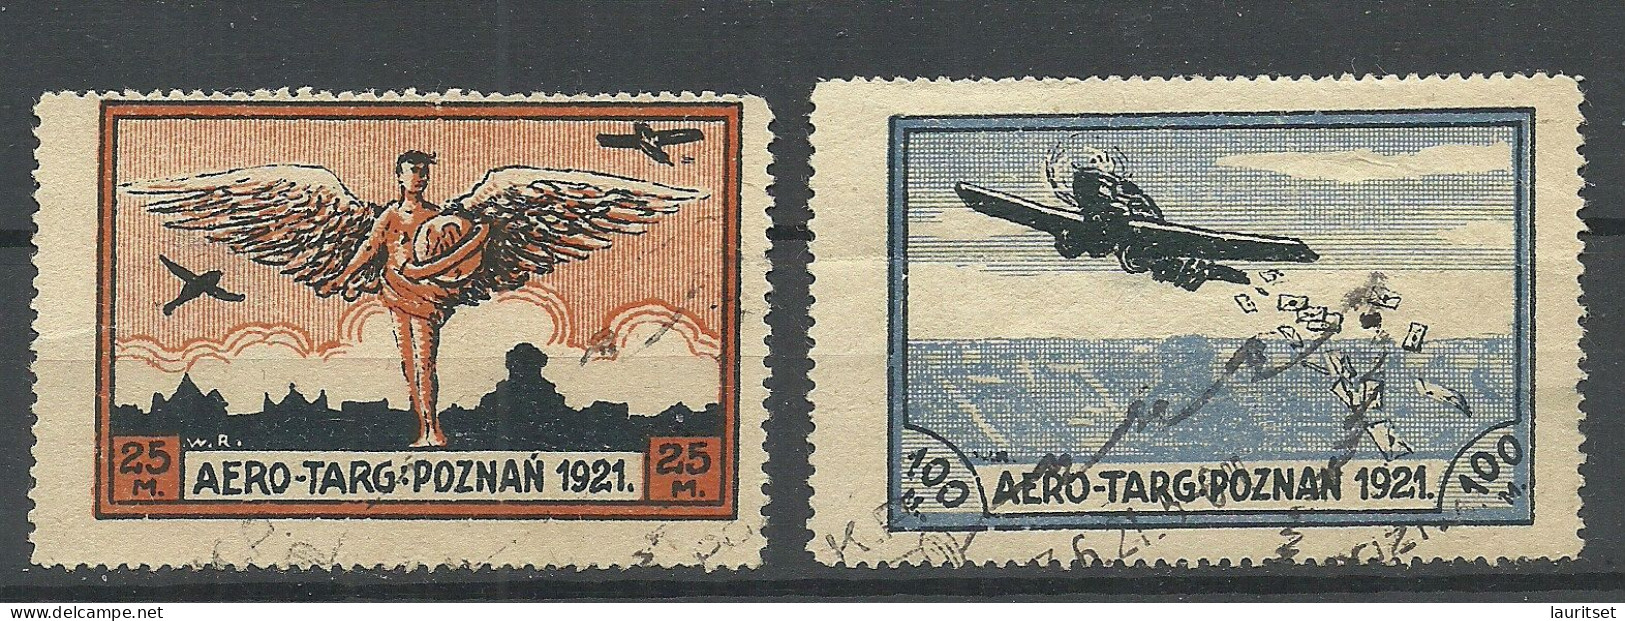 POLEN Poland 1921 Michel I - II Aviation Air Mail Poznan Aero Stamps O NB! Faults! Thinned Places! - Oblitérés